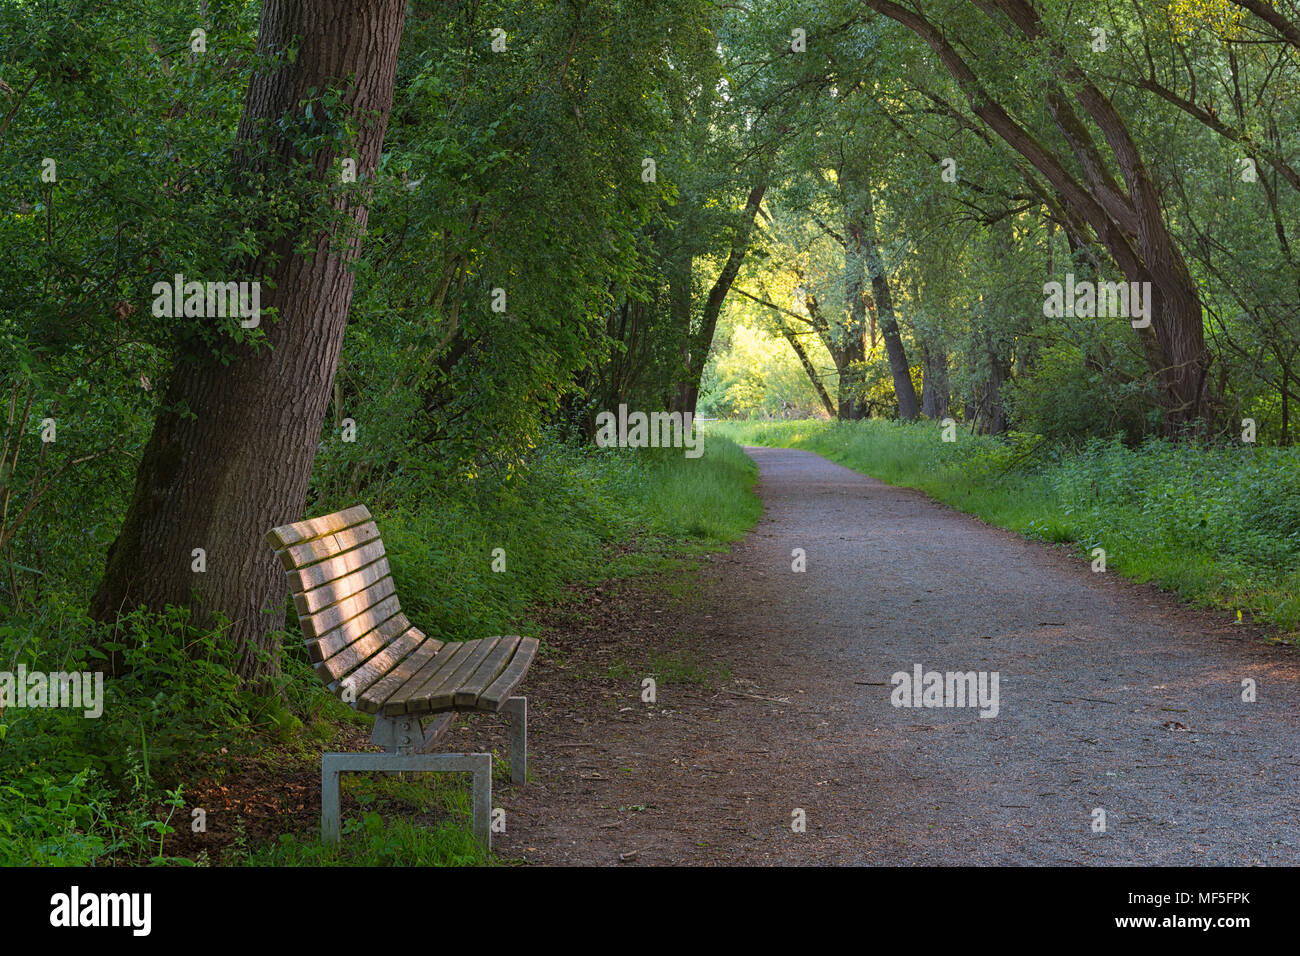 Germany, Ludwigshafen, Aachried, wooden bench and empty way Stock Photo